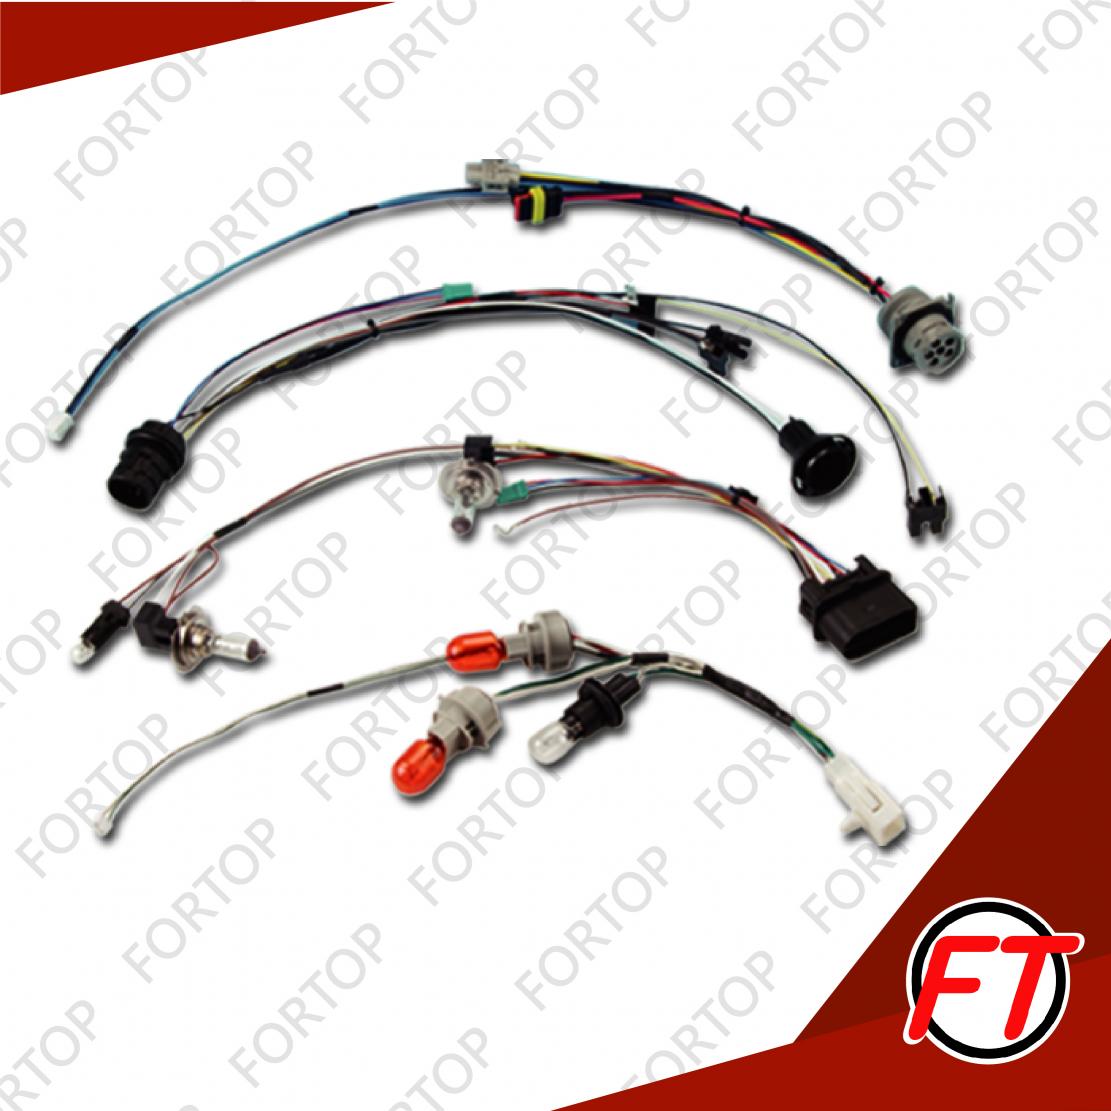 Harness For Auto Lamp